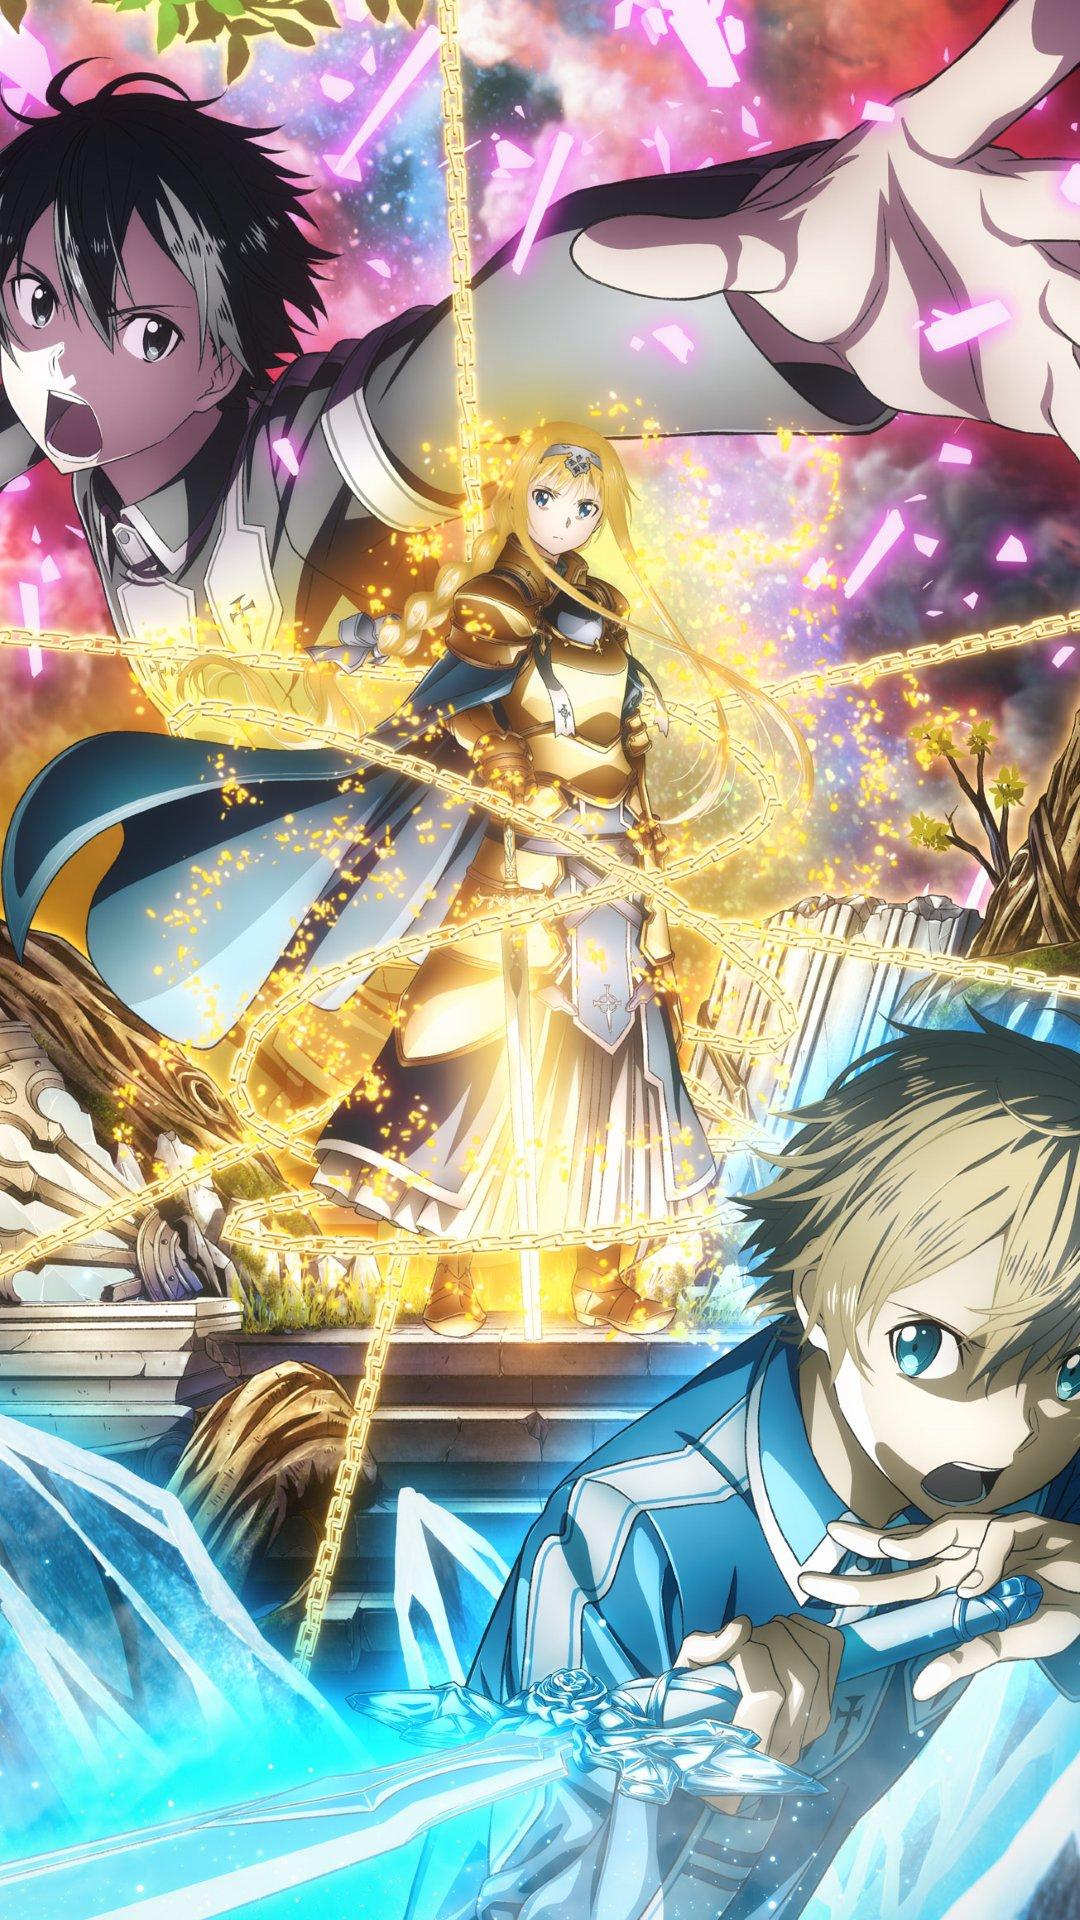 Sword Art Online: Alicization wallpaper for iPhone and android smartphones